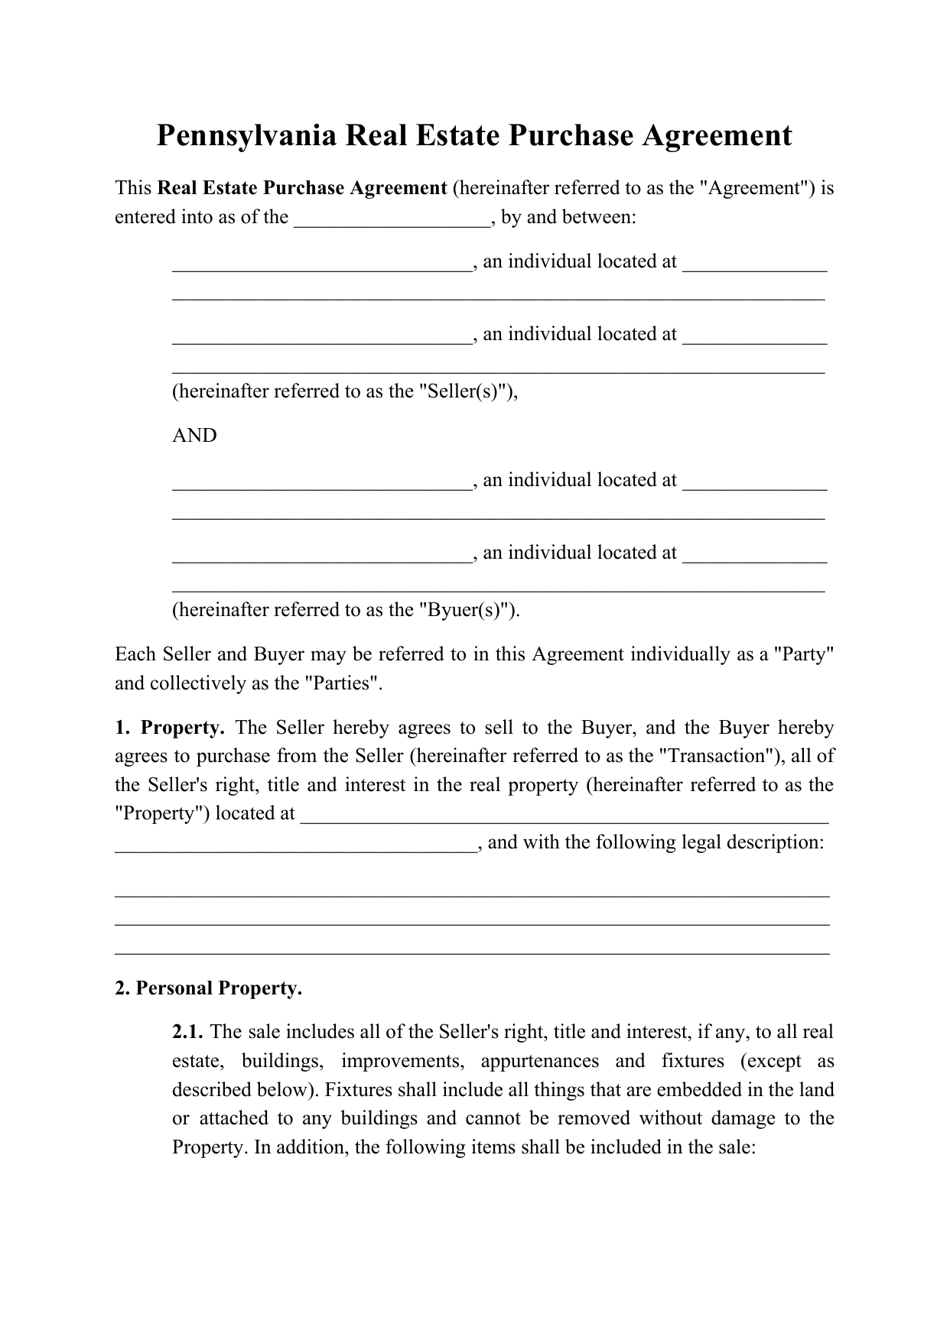 pennsylvania-real-estate-purchase-agreement-template-fill-out-sign-online-and-download-pdf